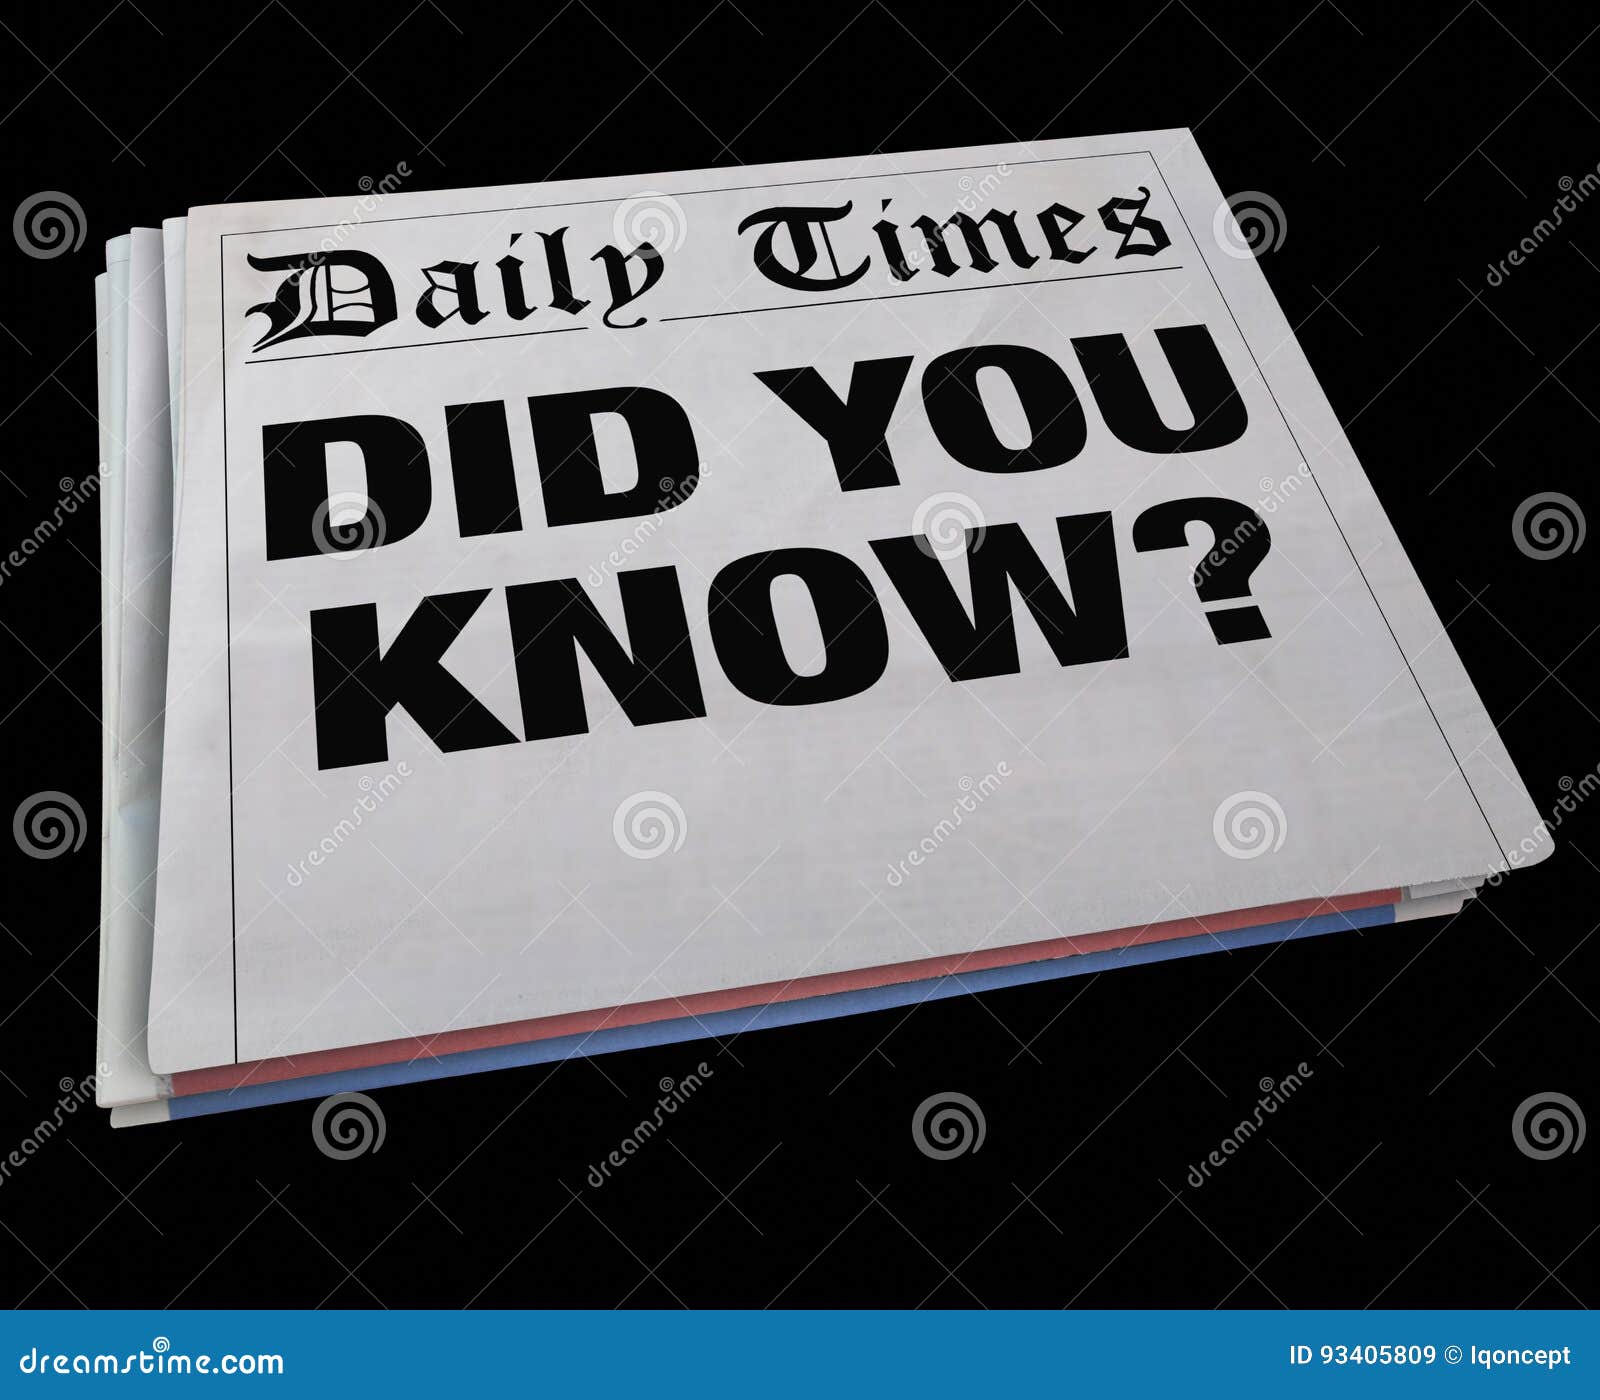 did you know spinning newspaper headline news update 3d 